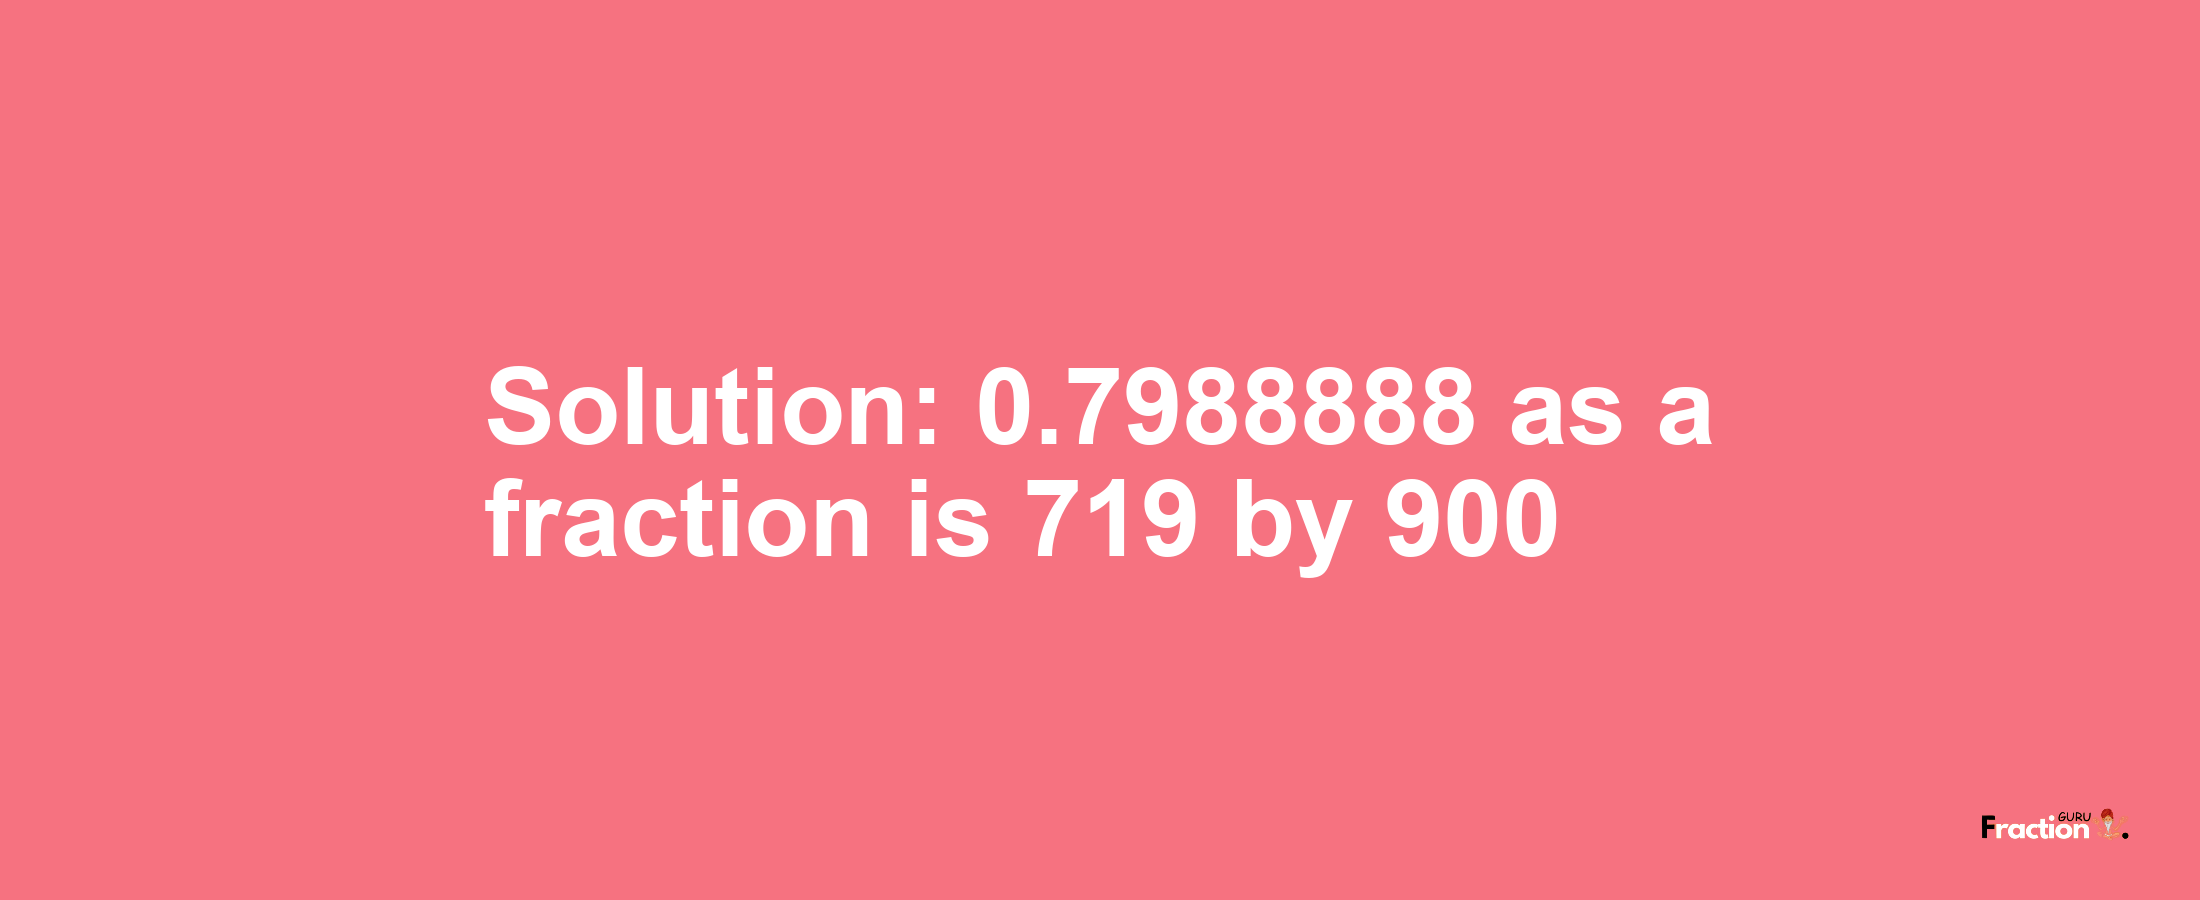 Solution:0.7988888 as a fraction is 719/900